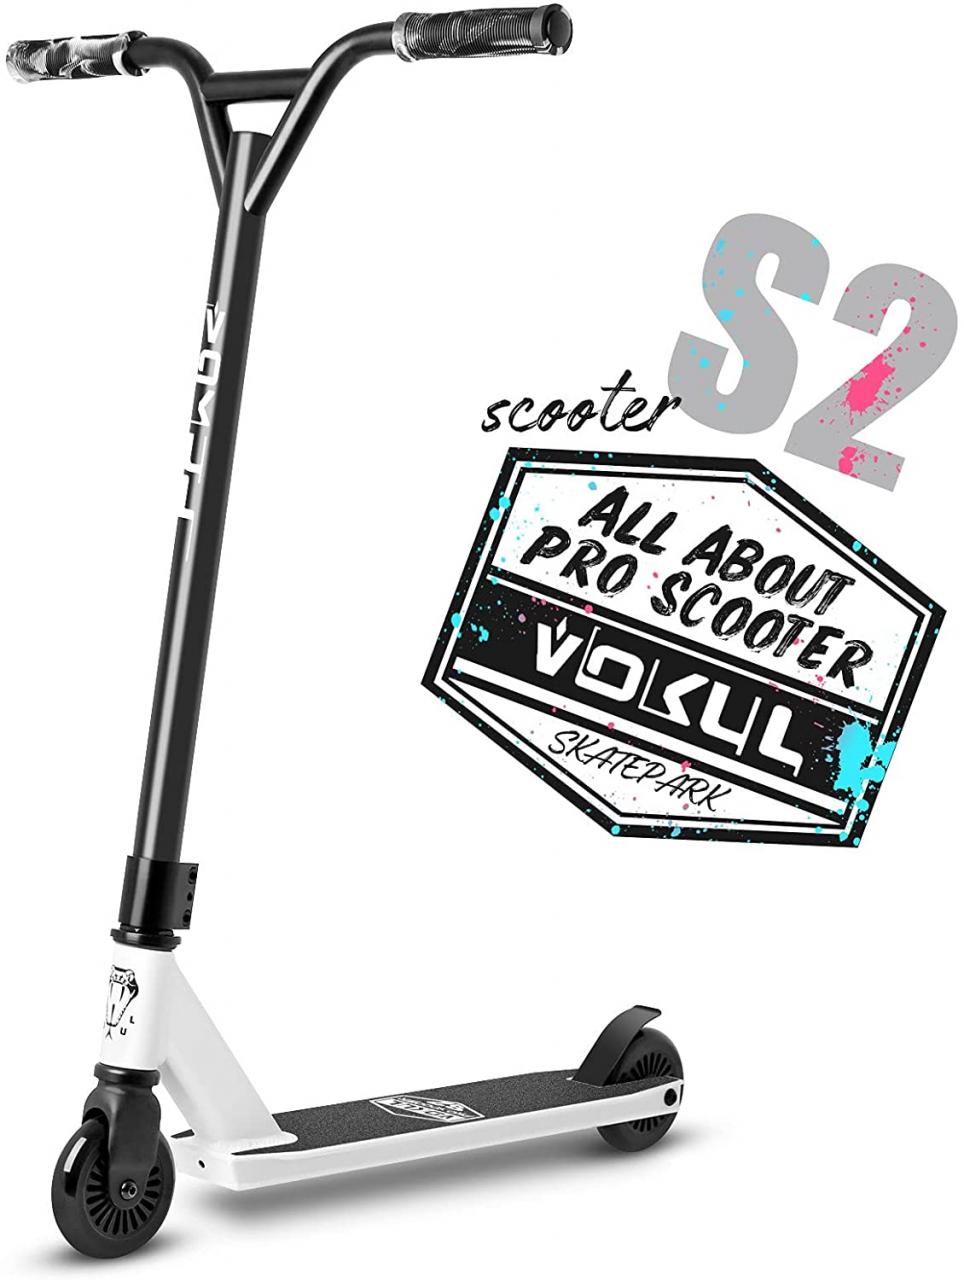 Buy VOKUL Complete Pro Scooter for Kids Boys Girls Teens Up 6 Years -  Freestyle Tricks Pro Stunt Scooter - High Performance Gift for Skatepark  Street Tricks Online in Indonesia. B073ZX5K3R